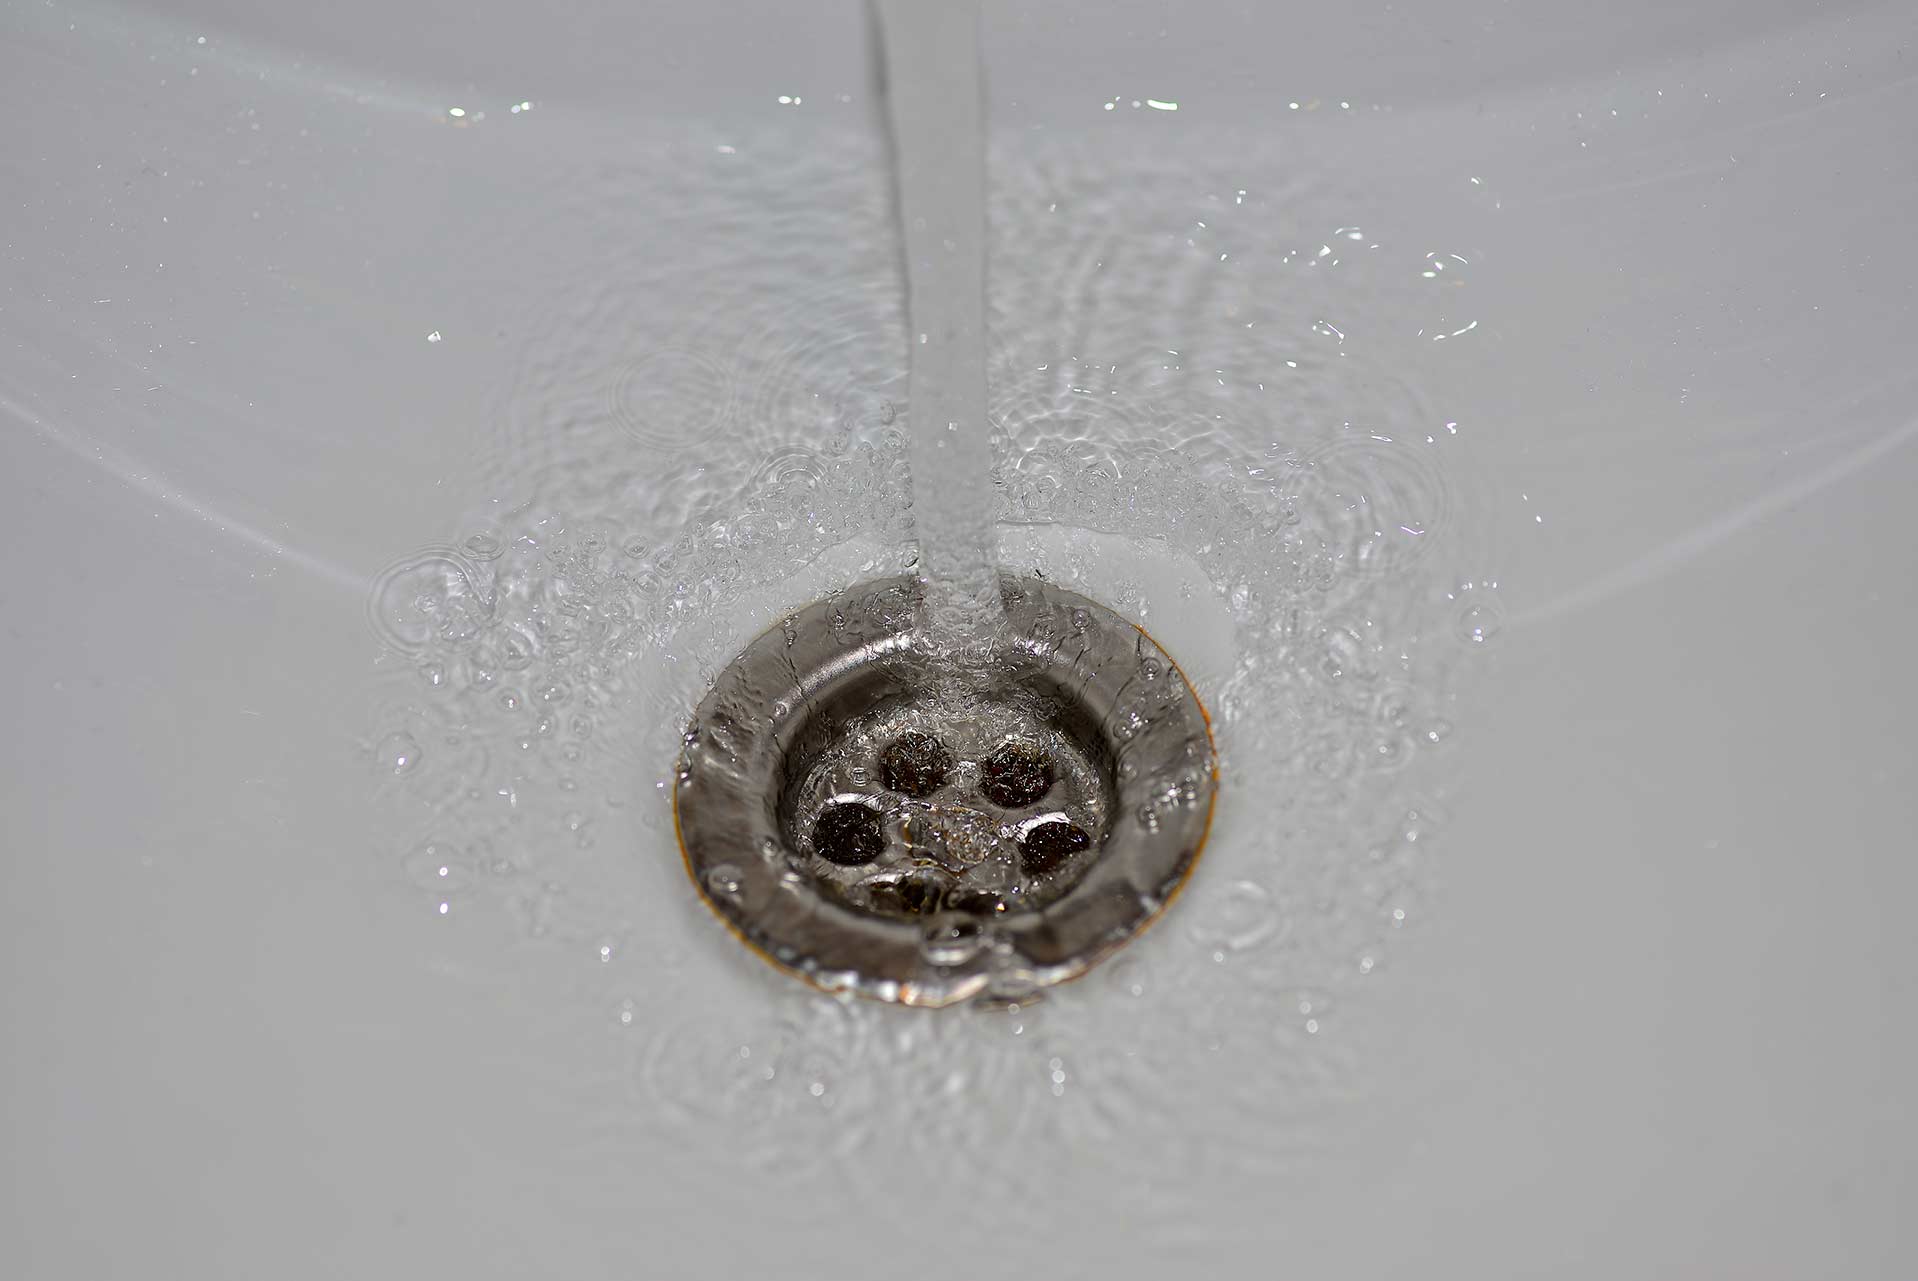 A2B Drains provides services to unblock blocked sinks and drains for properties in Cottingham.